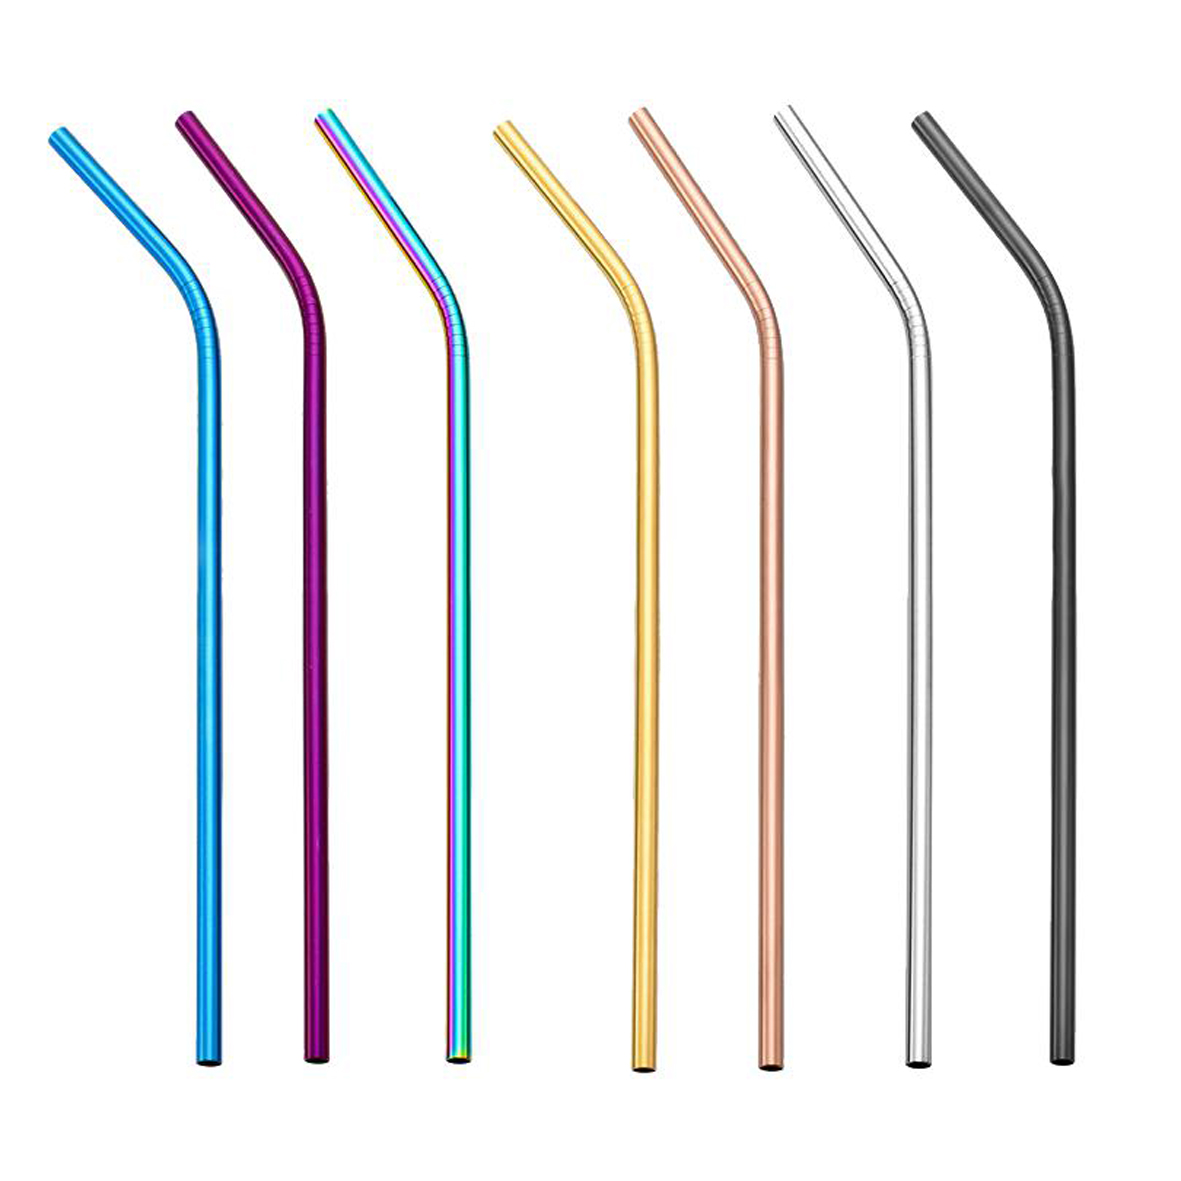 GL-ELY1247 Curved Stainless Steel Straw